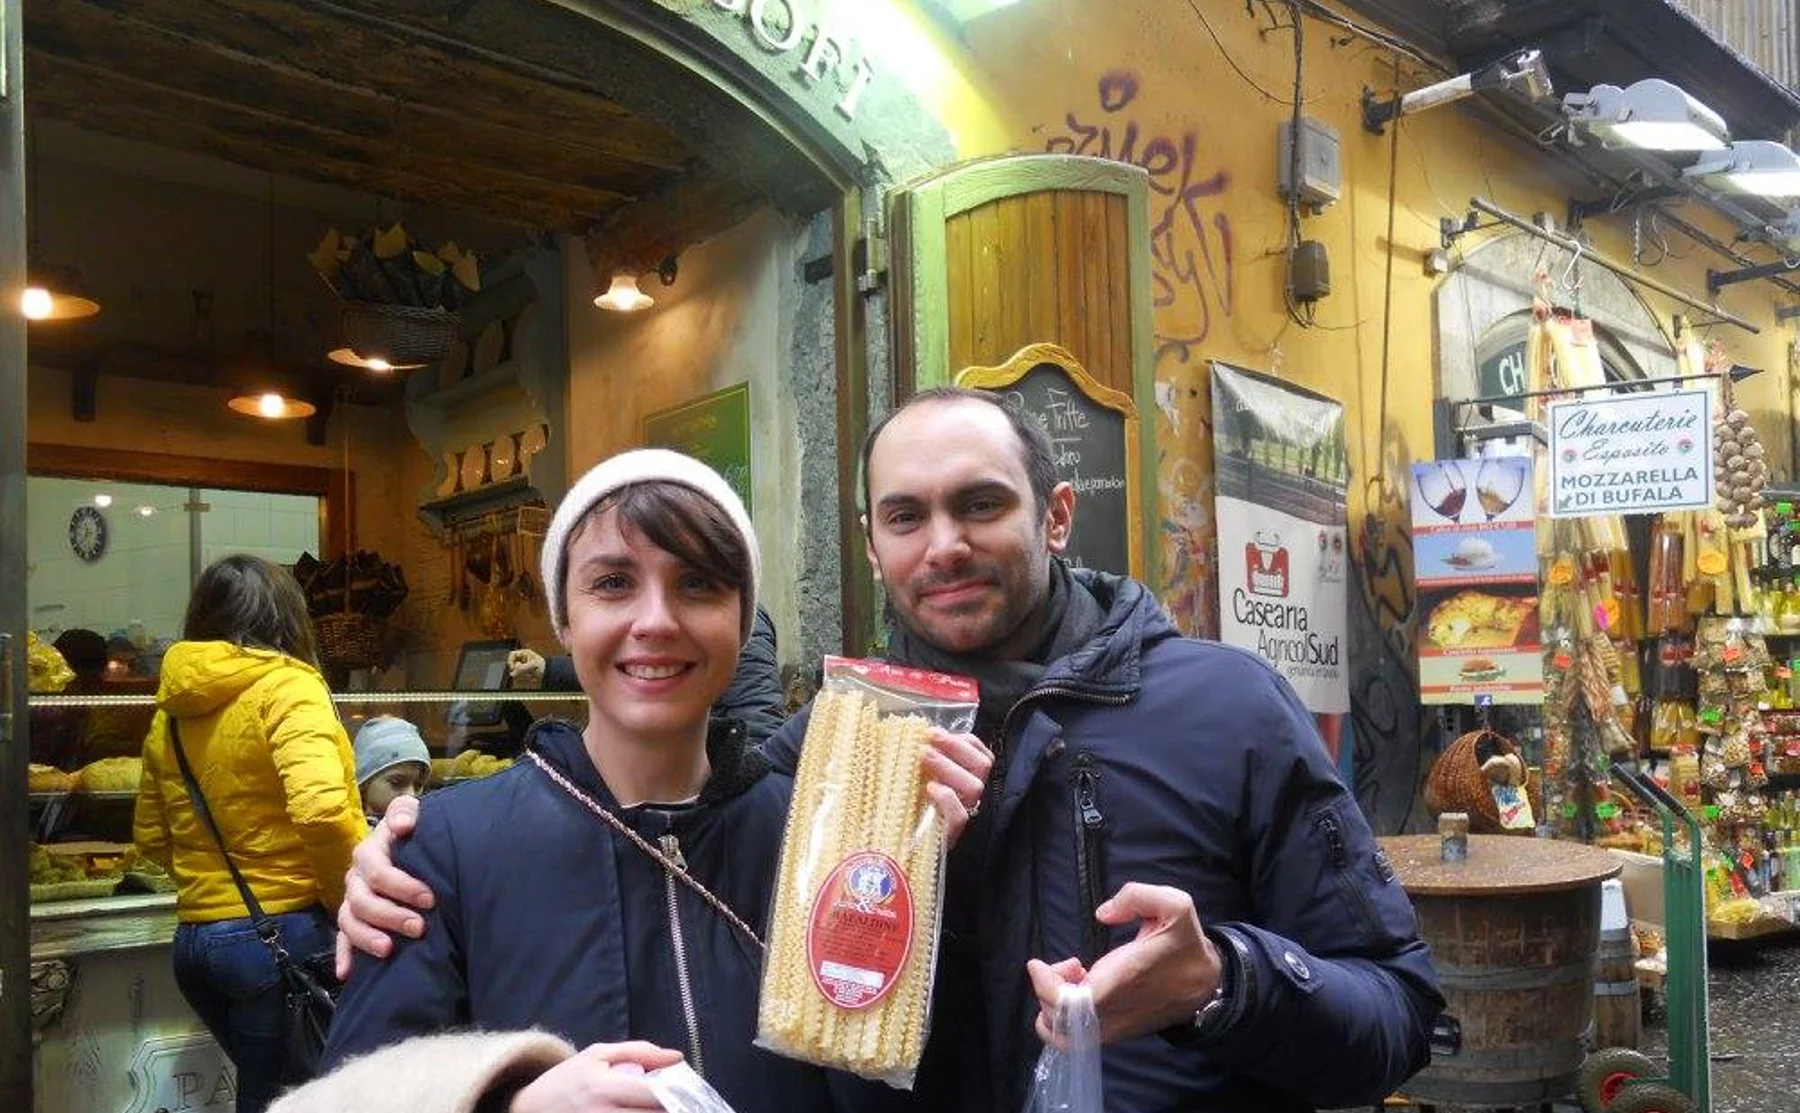 Naples's ancient market tour, cooking class and lunch - 1389964